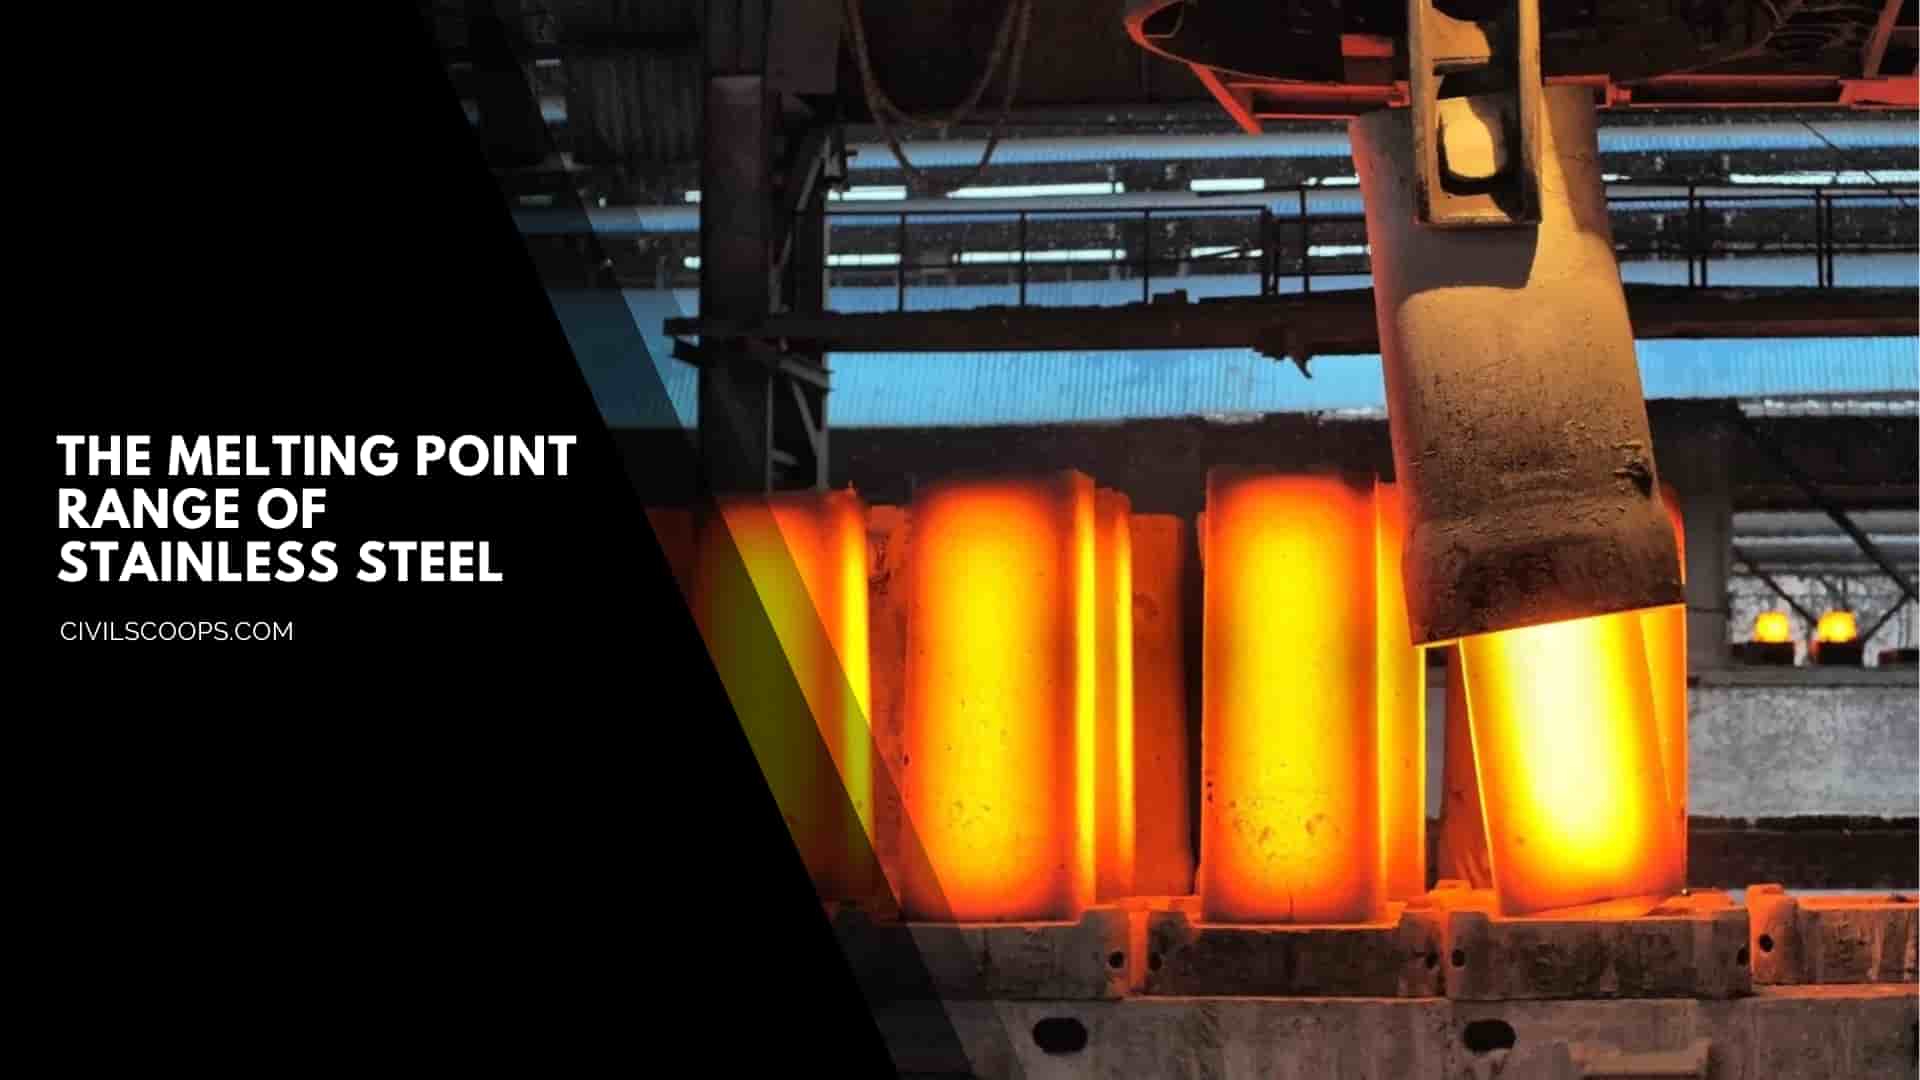 The Melting Point Range of Stainless Steel